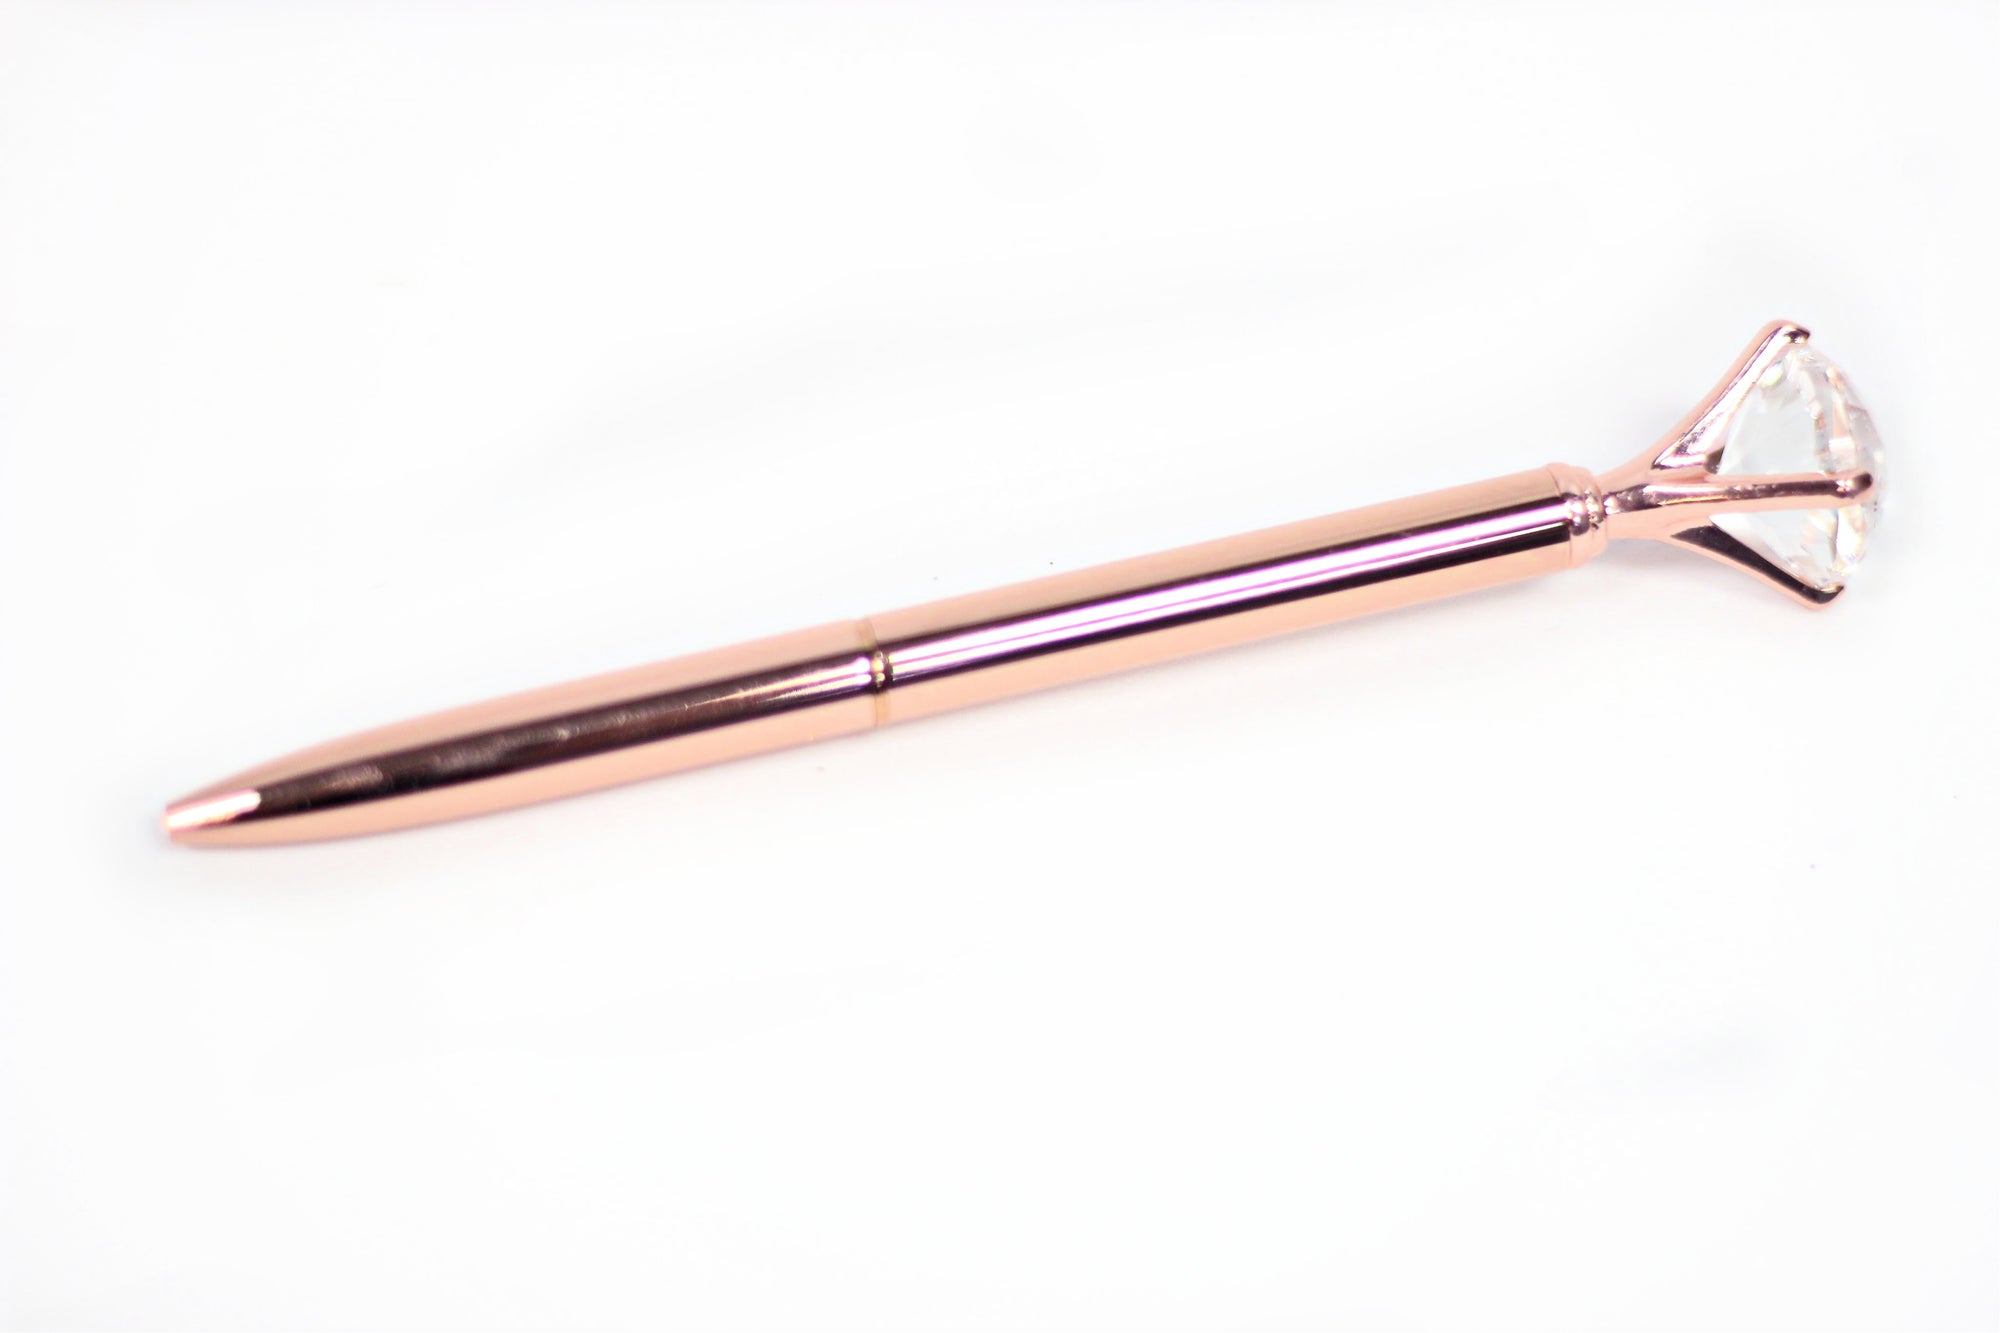 Glam Diamond Pen in Rose Gold, Gold, or Silver – The Bullish Store